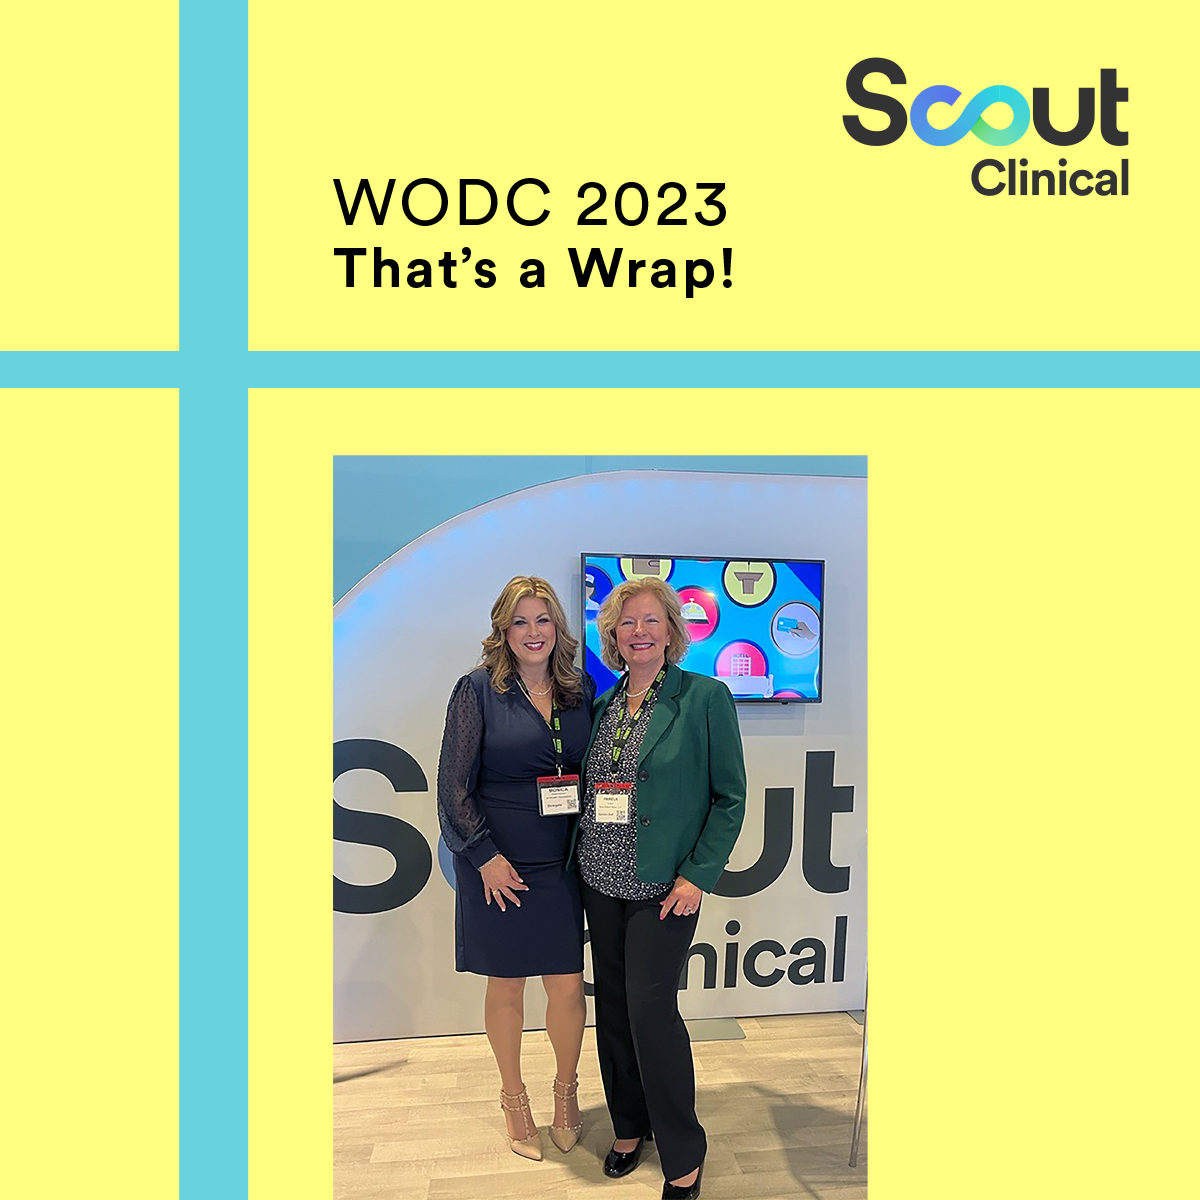 Until next time, D.C.! 👋 We had a great time #DrivingTheDiscussion with @rarepatientvoic and @Syngap1Fnd around enhancing the #PatientExperience and #PatientVoice in #RareDiseases. 

Join us in continuing the conversation.
hubs.ly/Q01Rf5Zp0

#WorldOrphanUSA #WODC2023